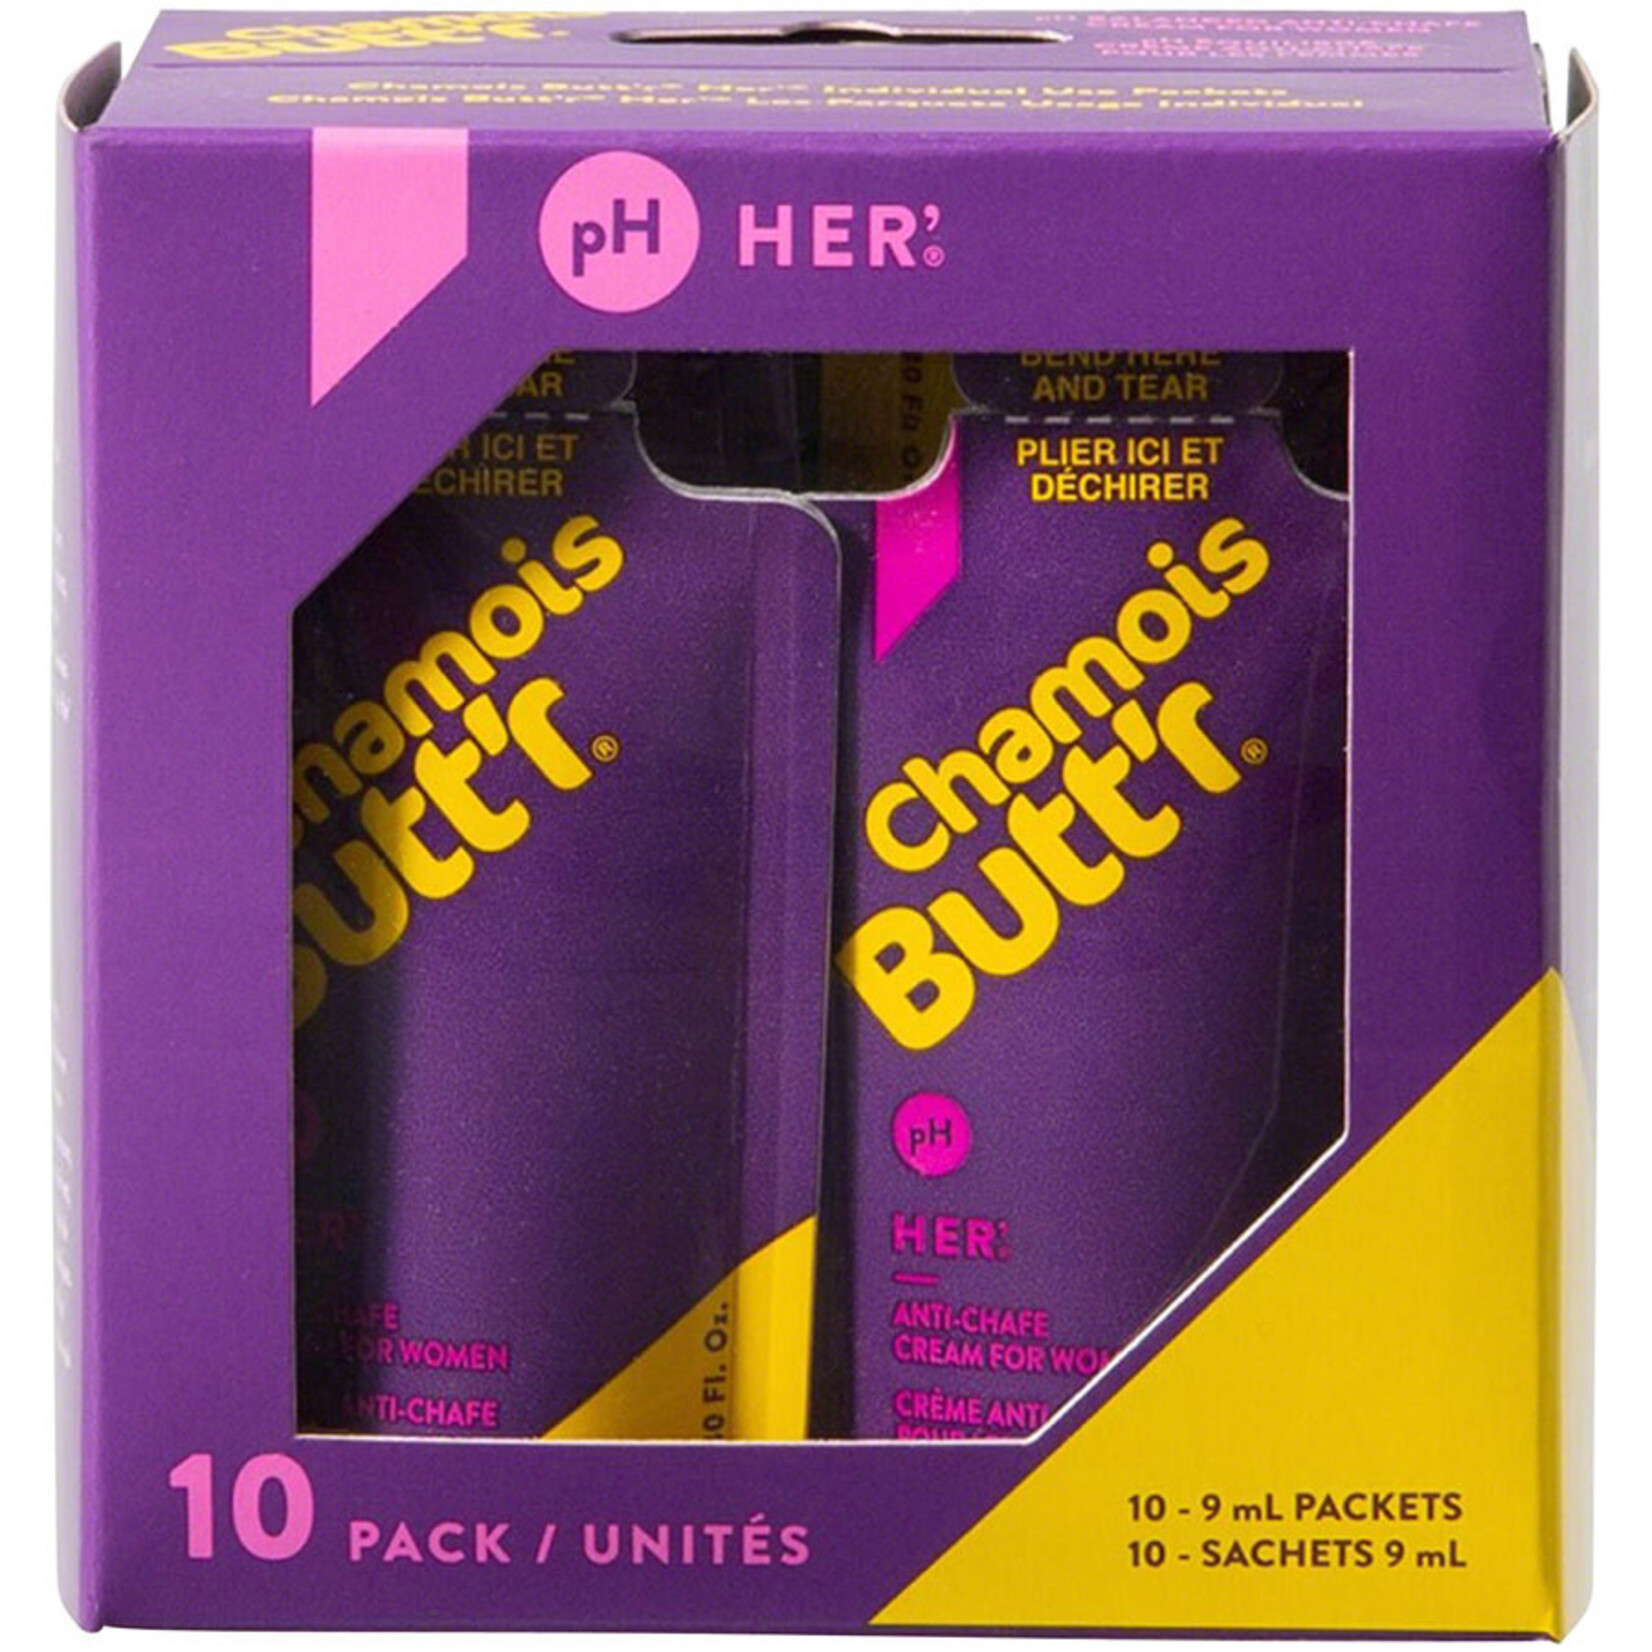 PACELINE PRODUCTS Paceline Chamois Butt'r Her Box of 10 x 9ml Packet